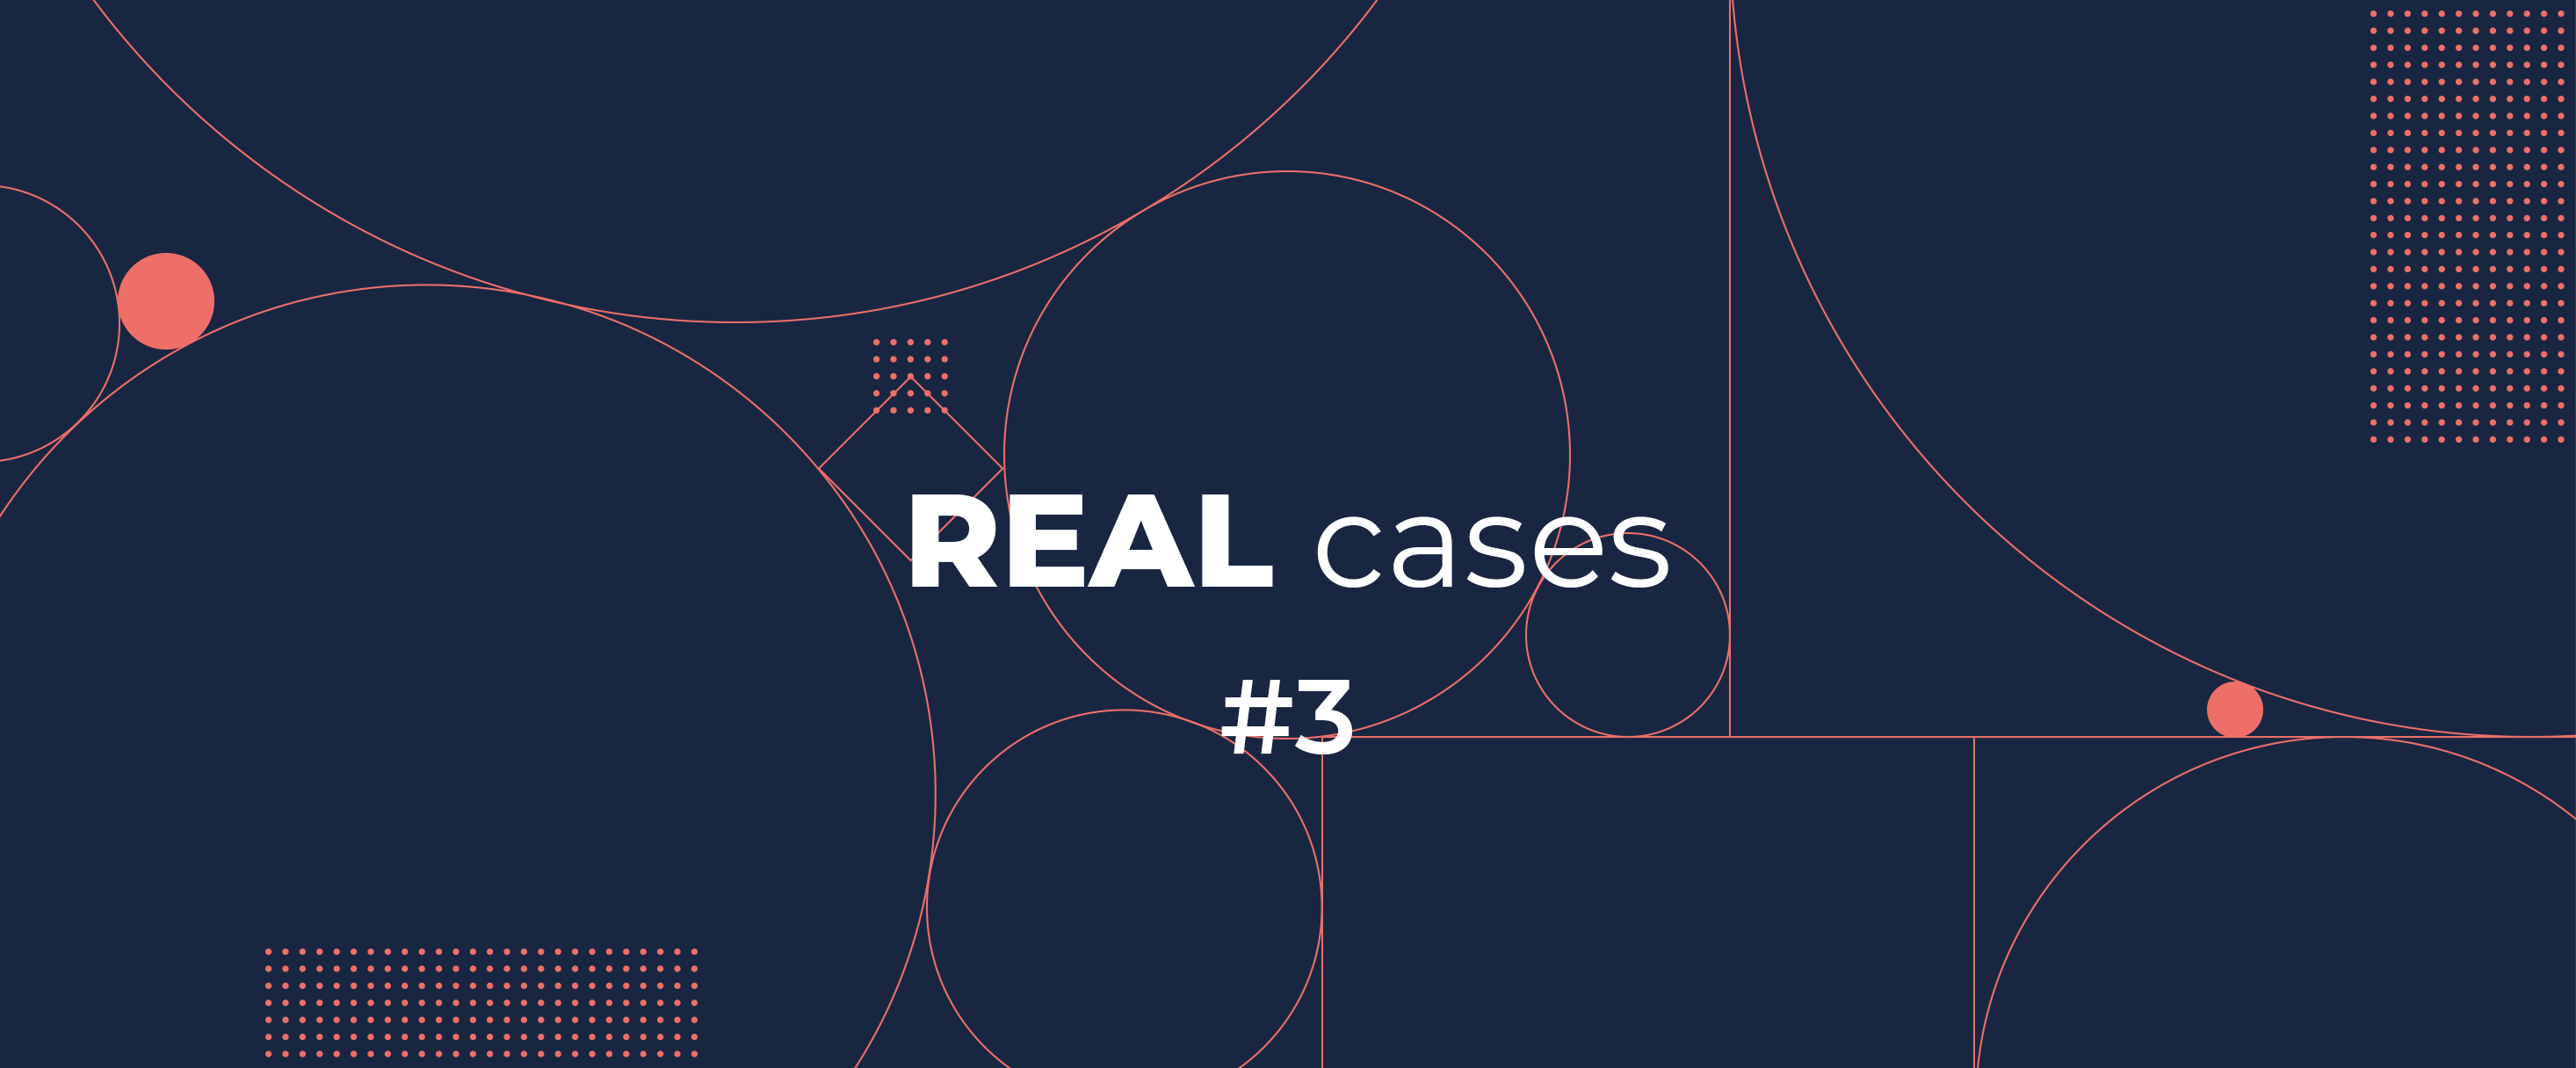 blue background with graphic pattern and text saying real cases nr 3